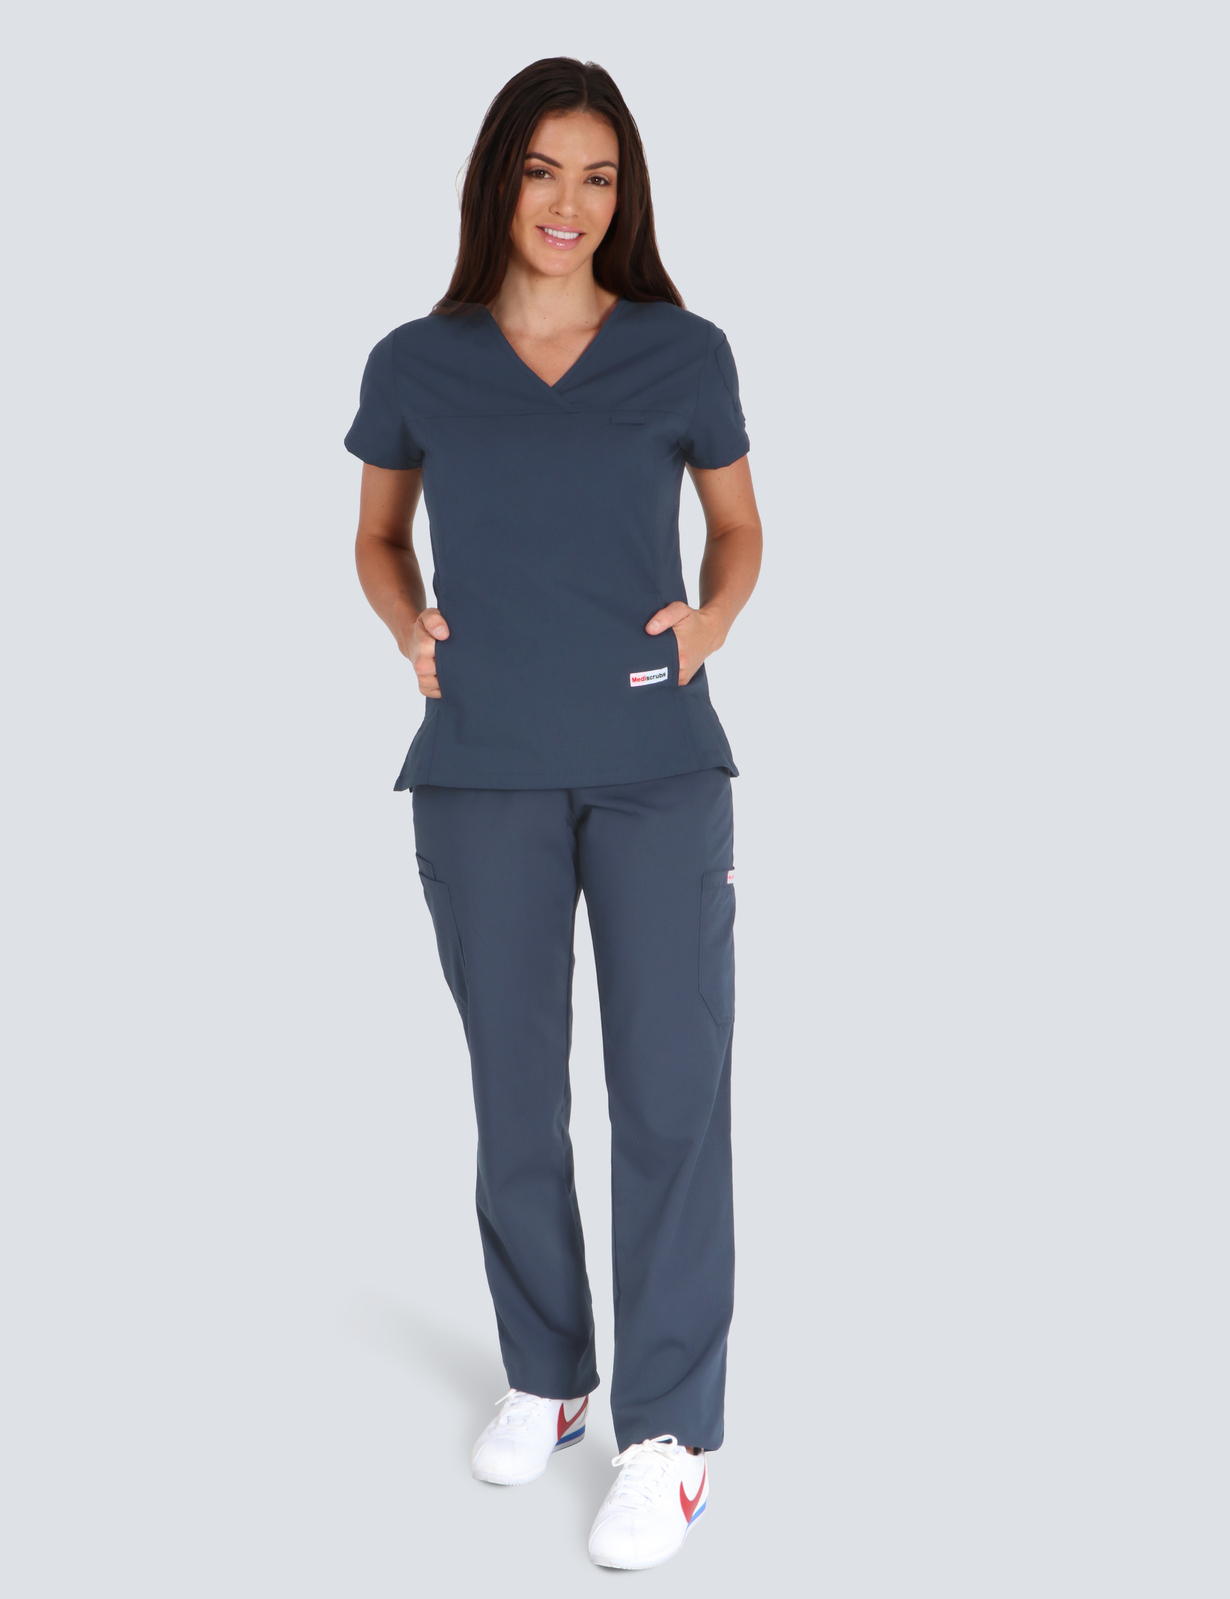 Ipswich Hospital - ED/ER (Women's Fit Solid Scrub Top and Cargo Pants in Black incl Logos)